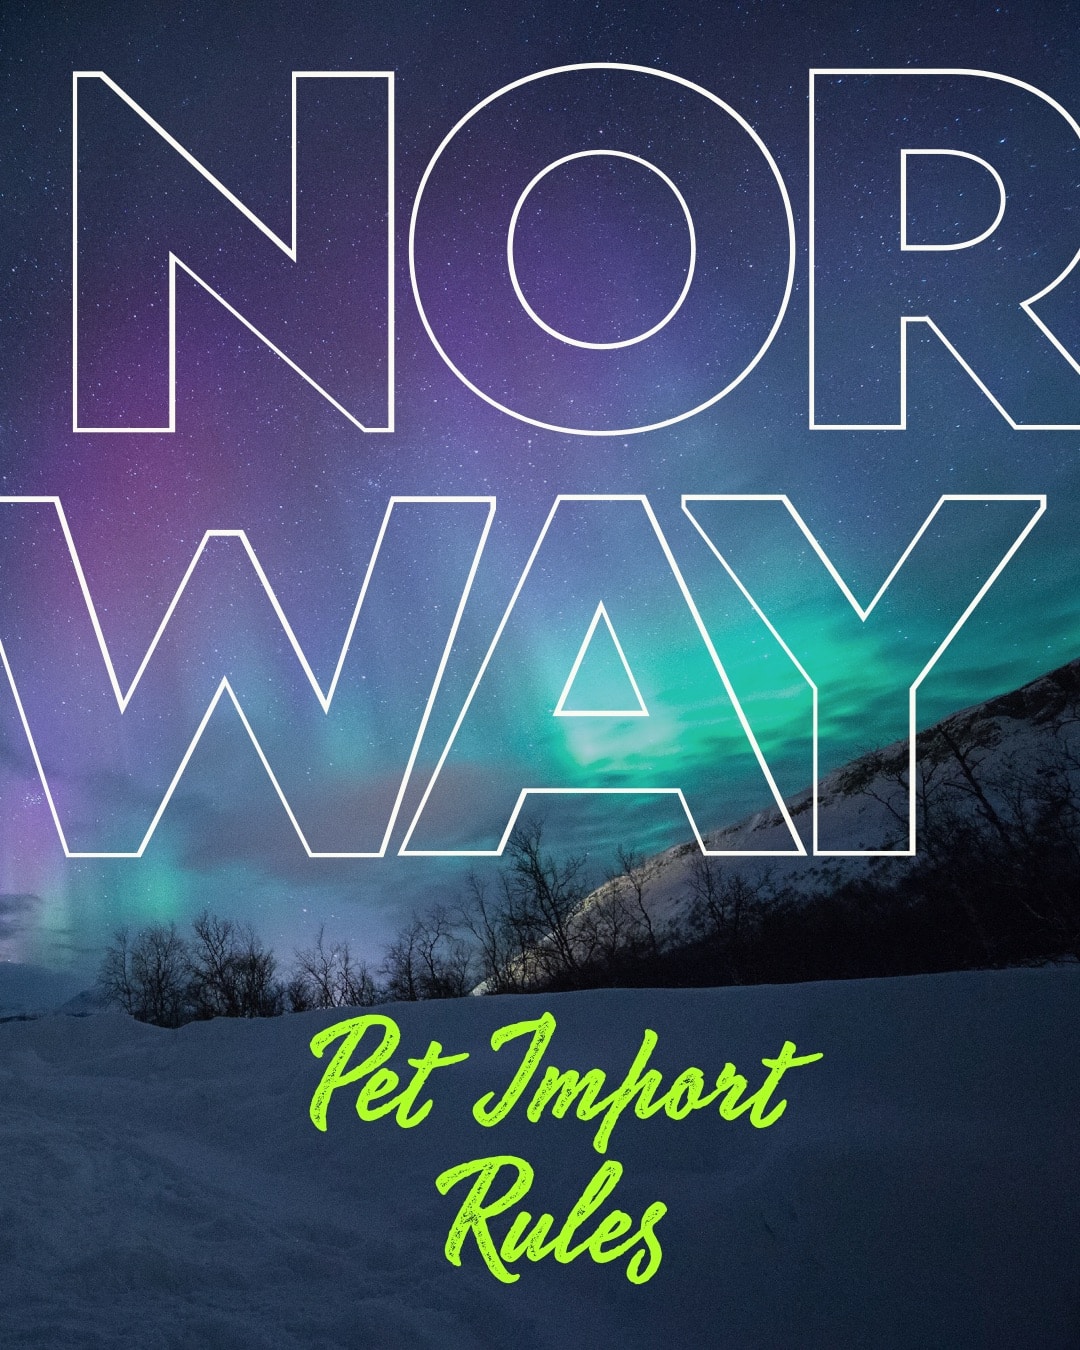 Norway pet import rules taking cats and dogs to Norway PETS pet passport